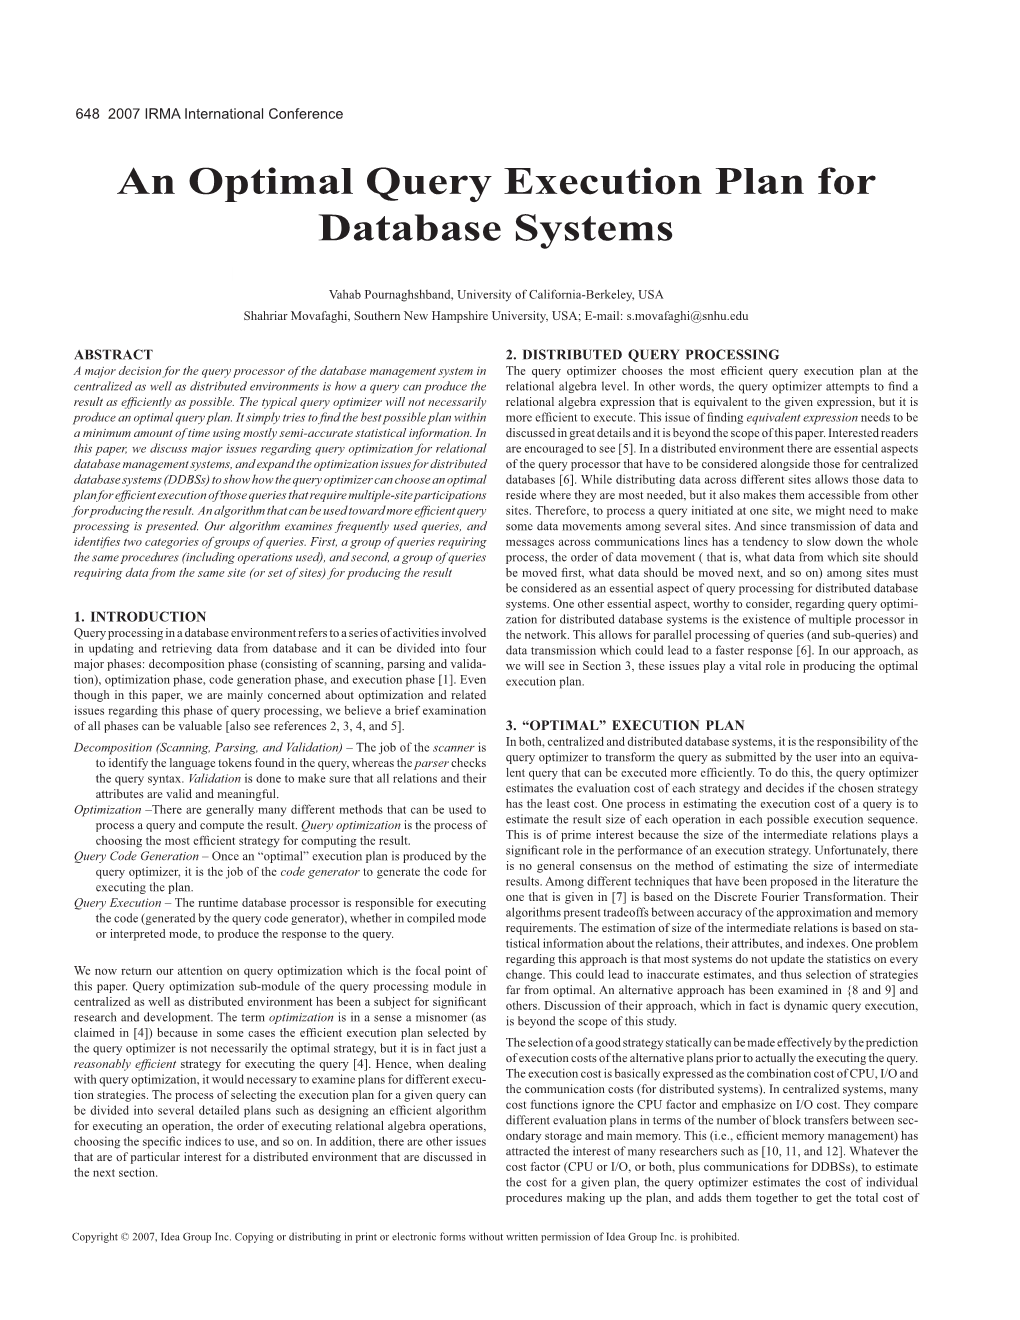 An Optimal Query Execution Plan for Database Systems